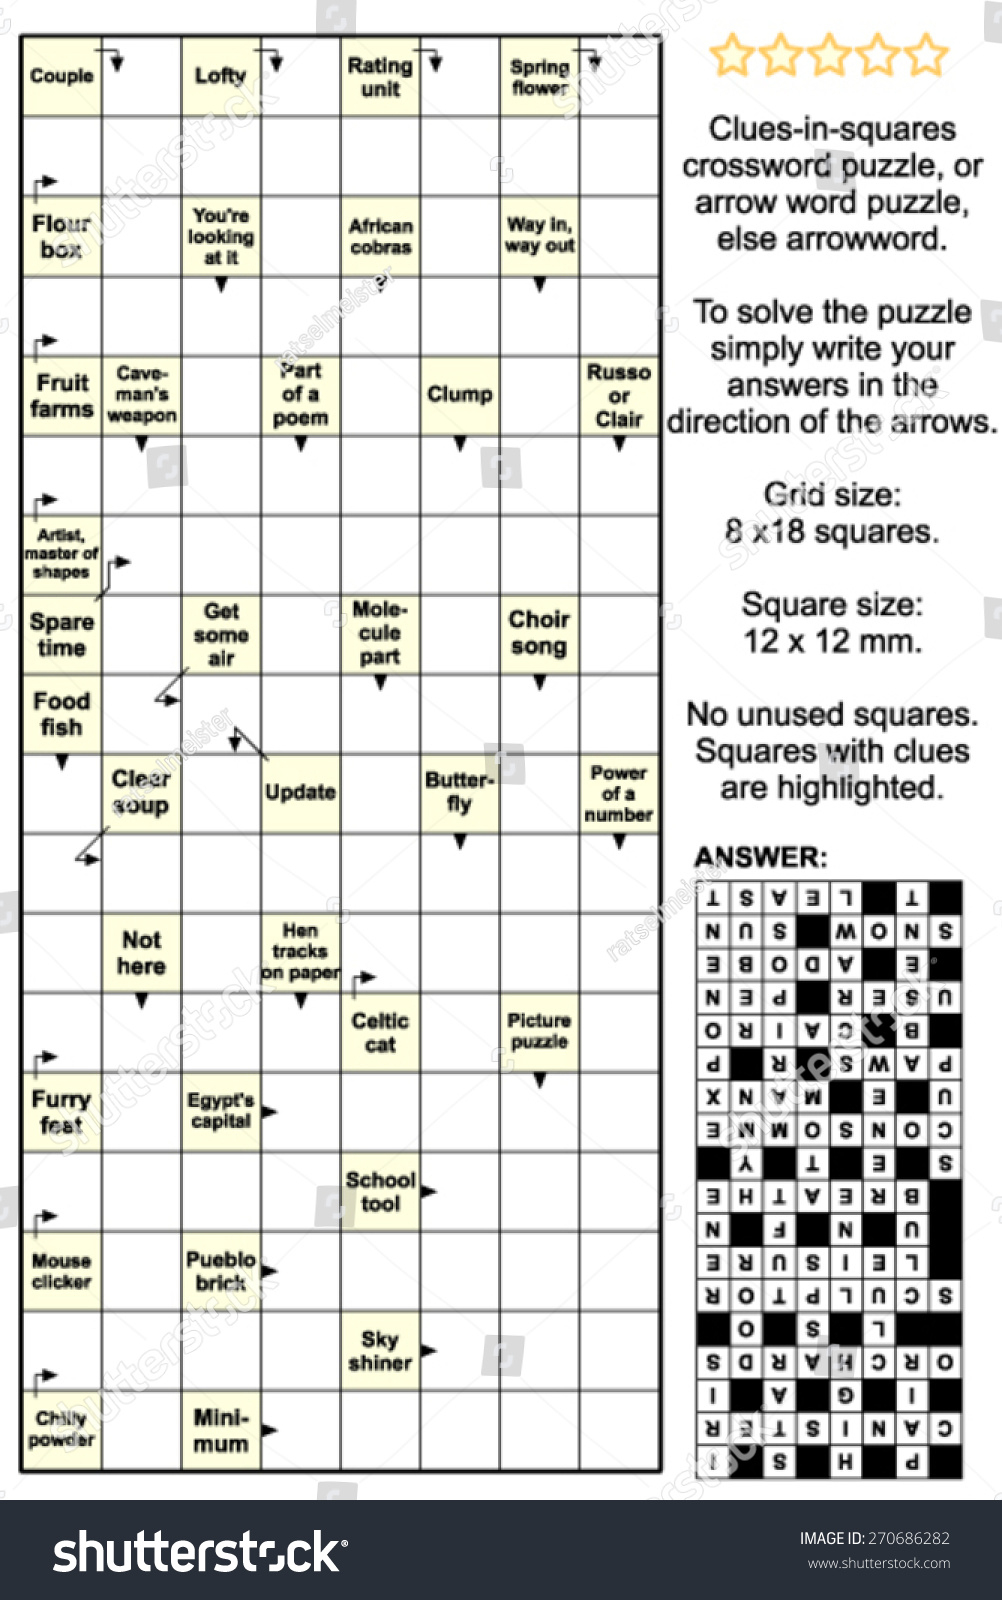 Clues-In-Squares Crossword Puzzle, Or… Stock Photo 270686282 - Printable Arrow Crossword Puzzles For Free